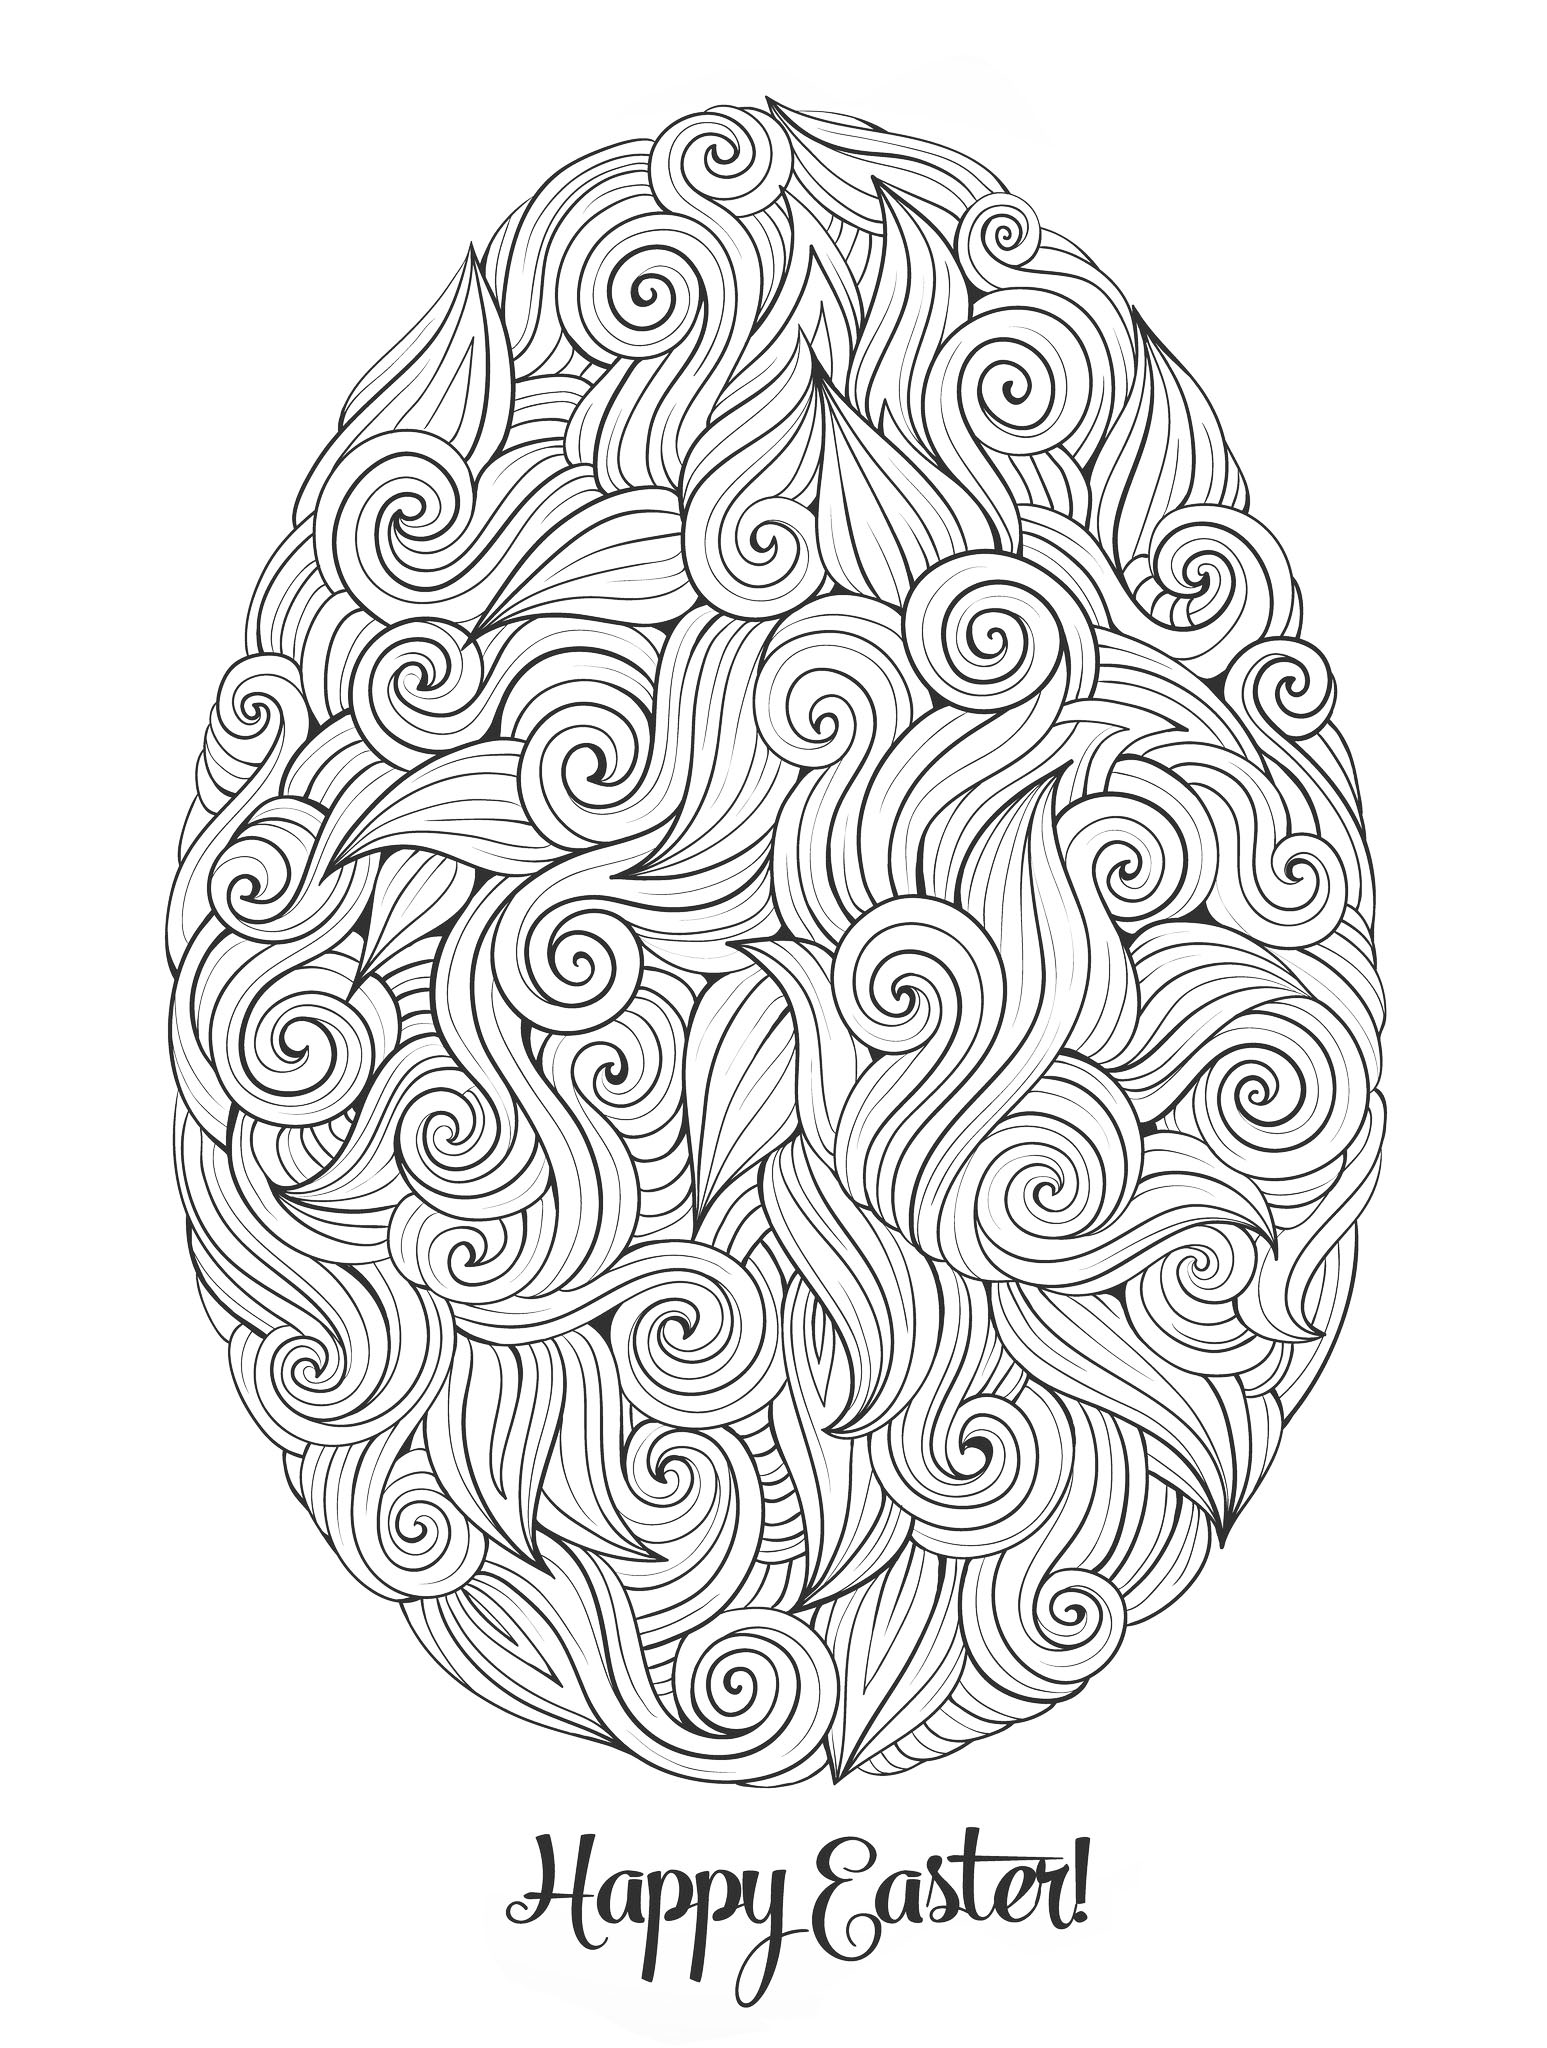 Download Easter egg - Easter Adult Coloring Pages